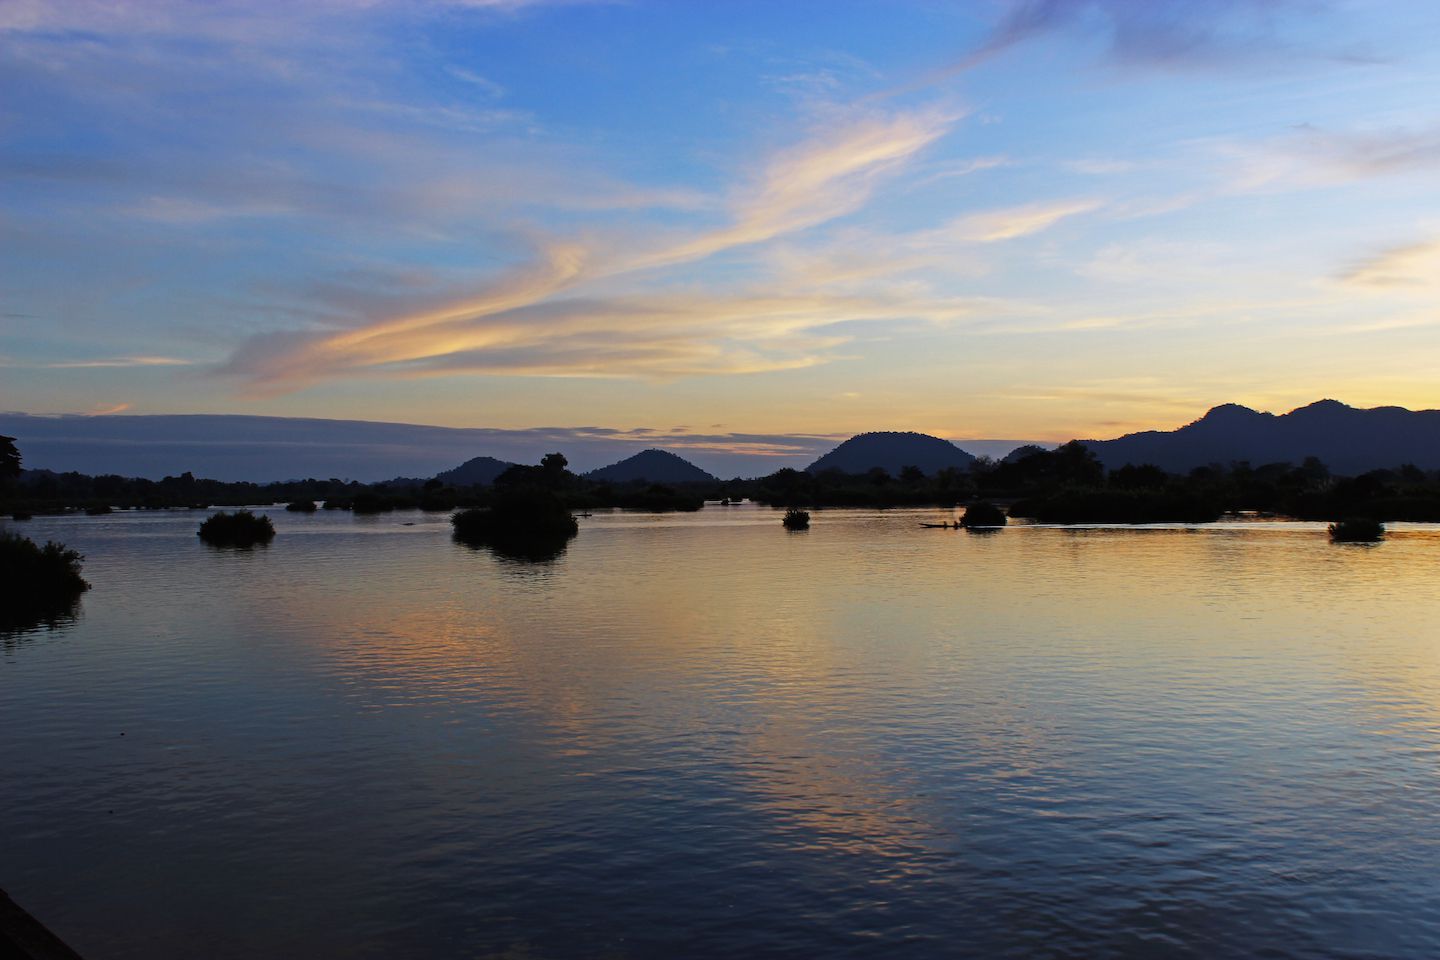 Sunset over the mountains, 4000 Islands (Si Phan Don), Laos